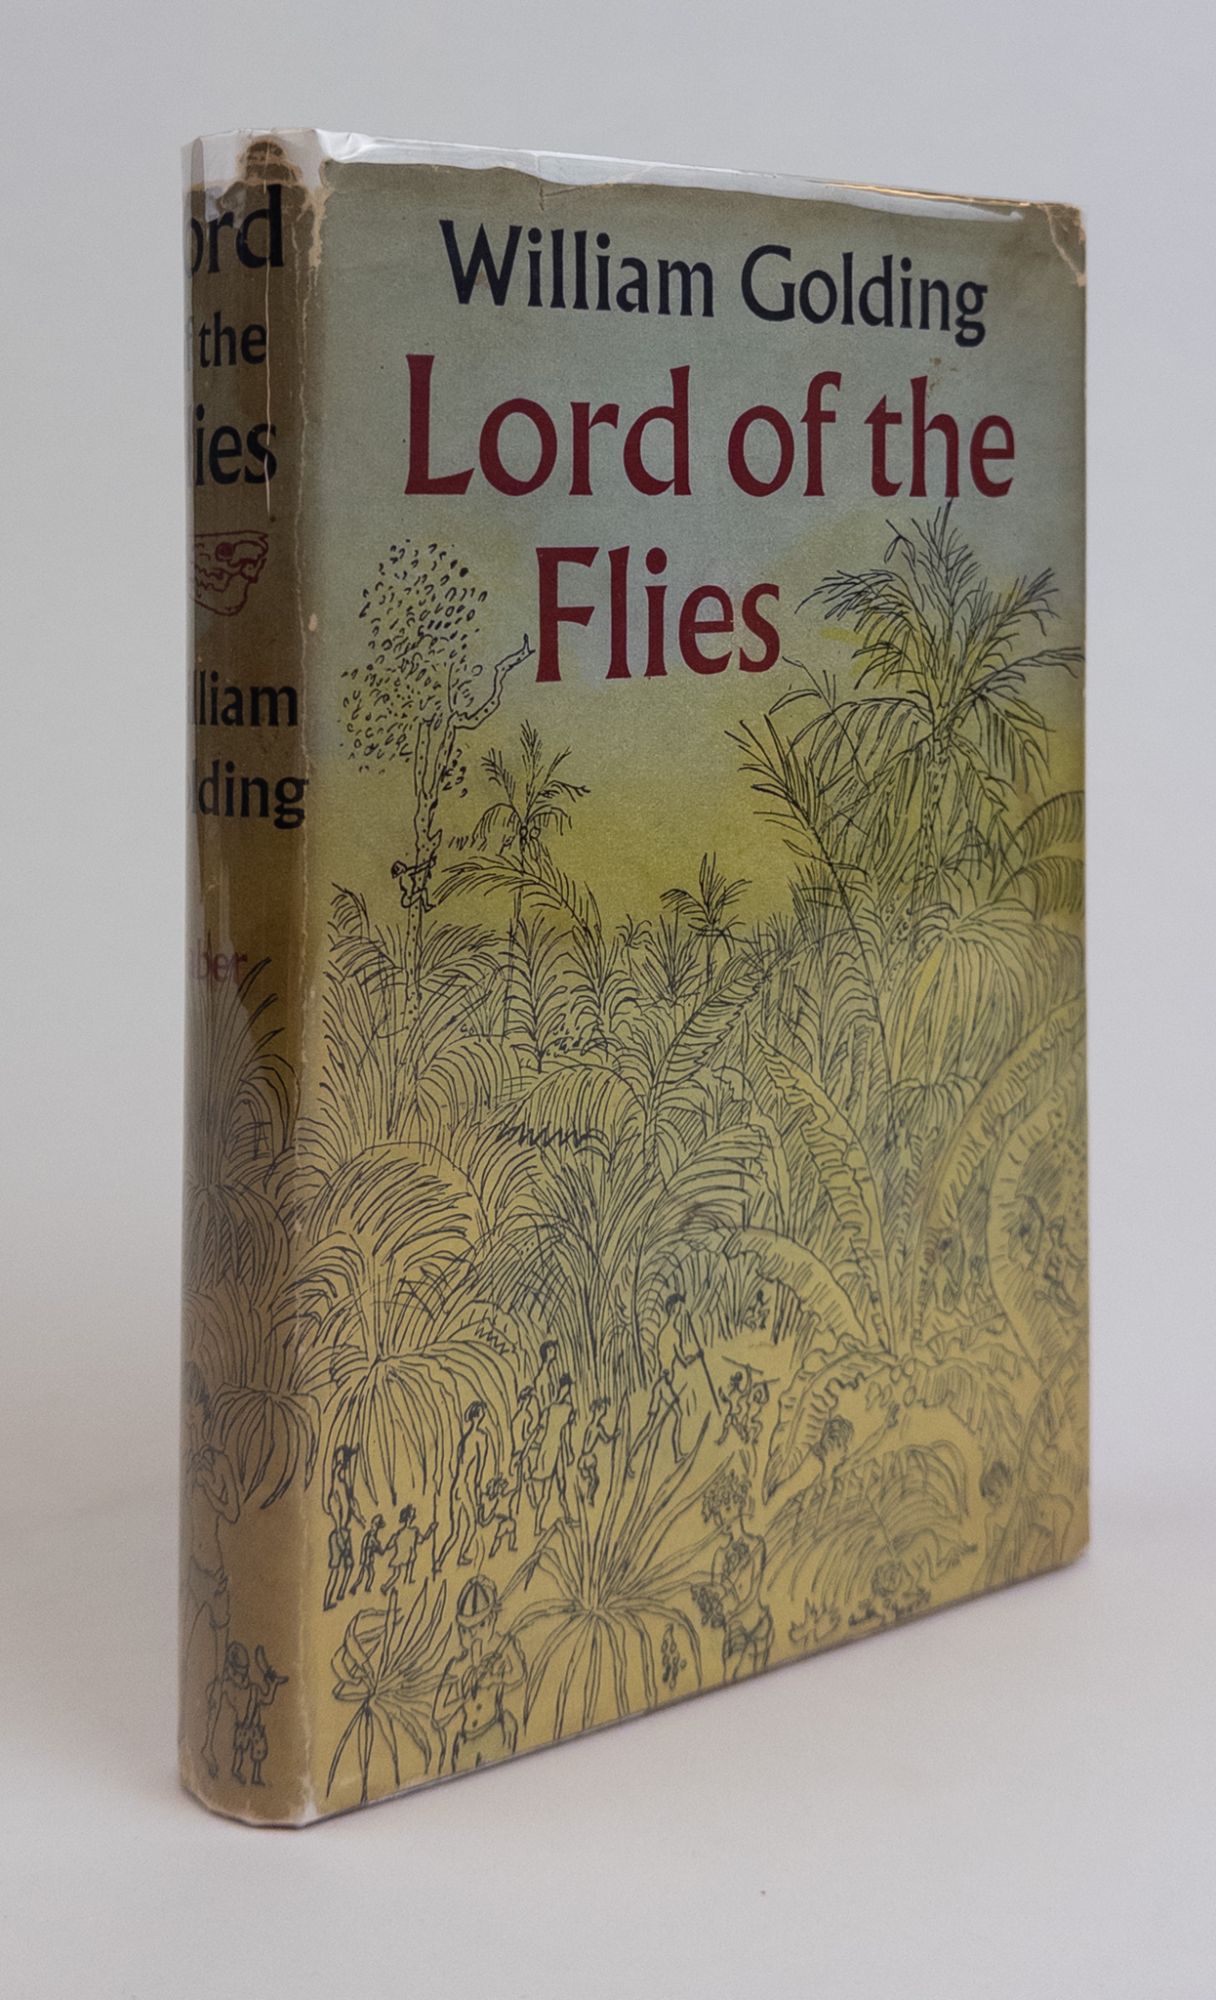 Product Image for LORD OF THE FLIES